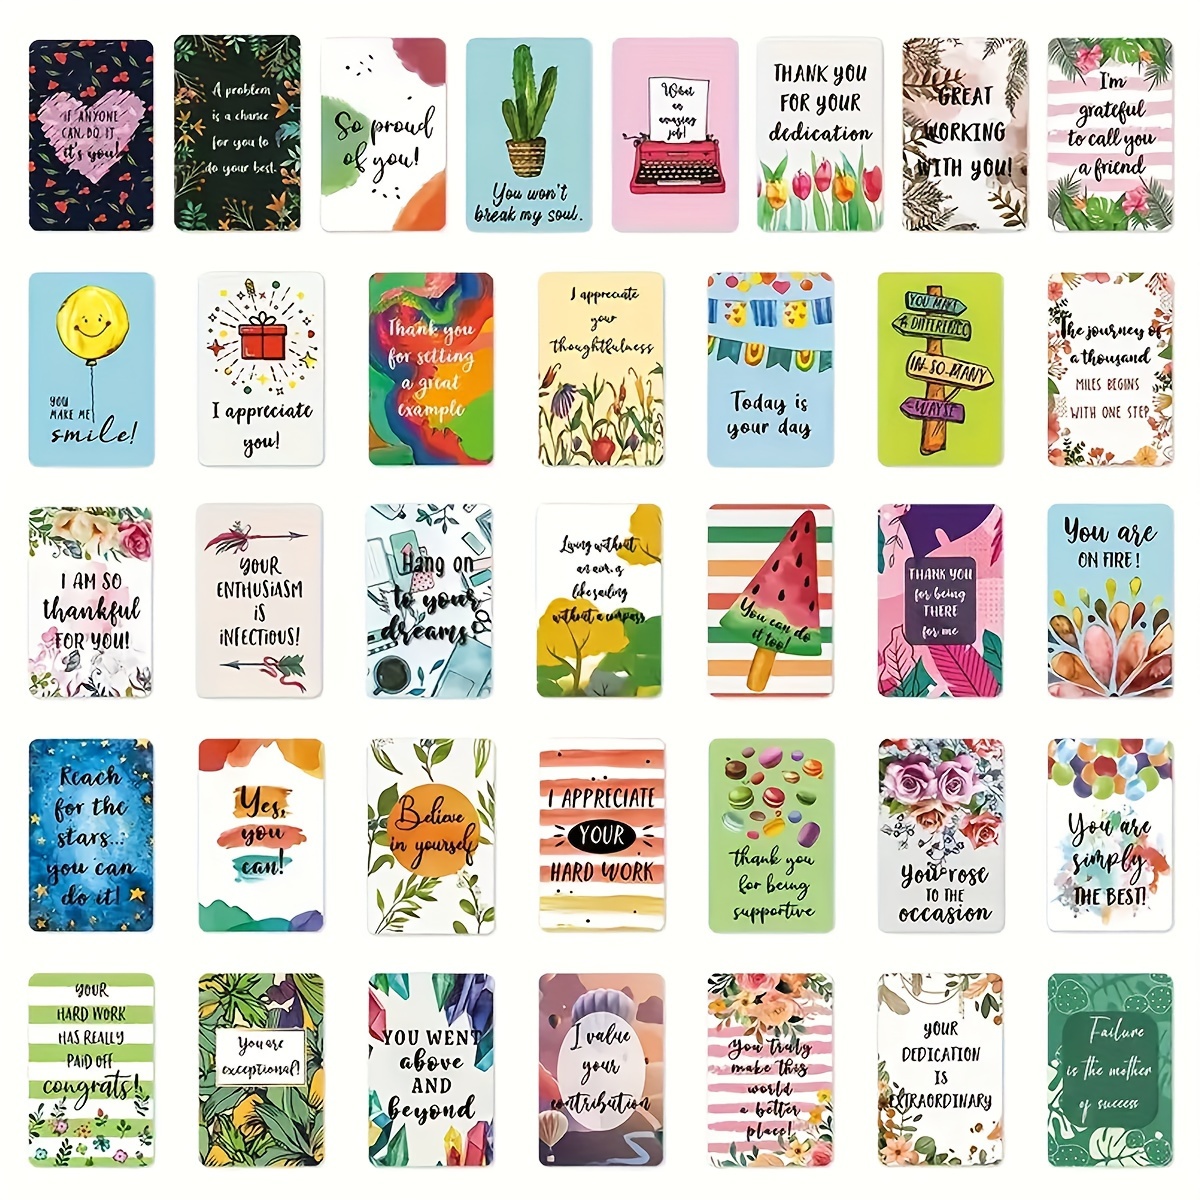 

72 Encouragement Cards - Handwritten Lunch Box Cards - Office Supplies - Card Stationery